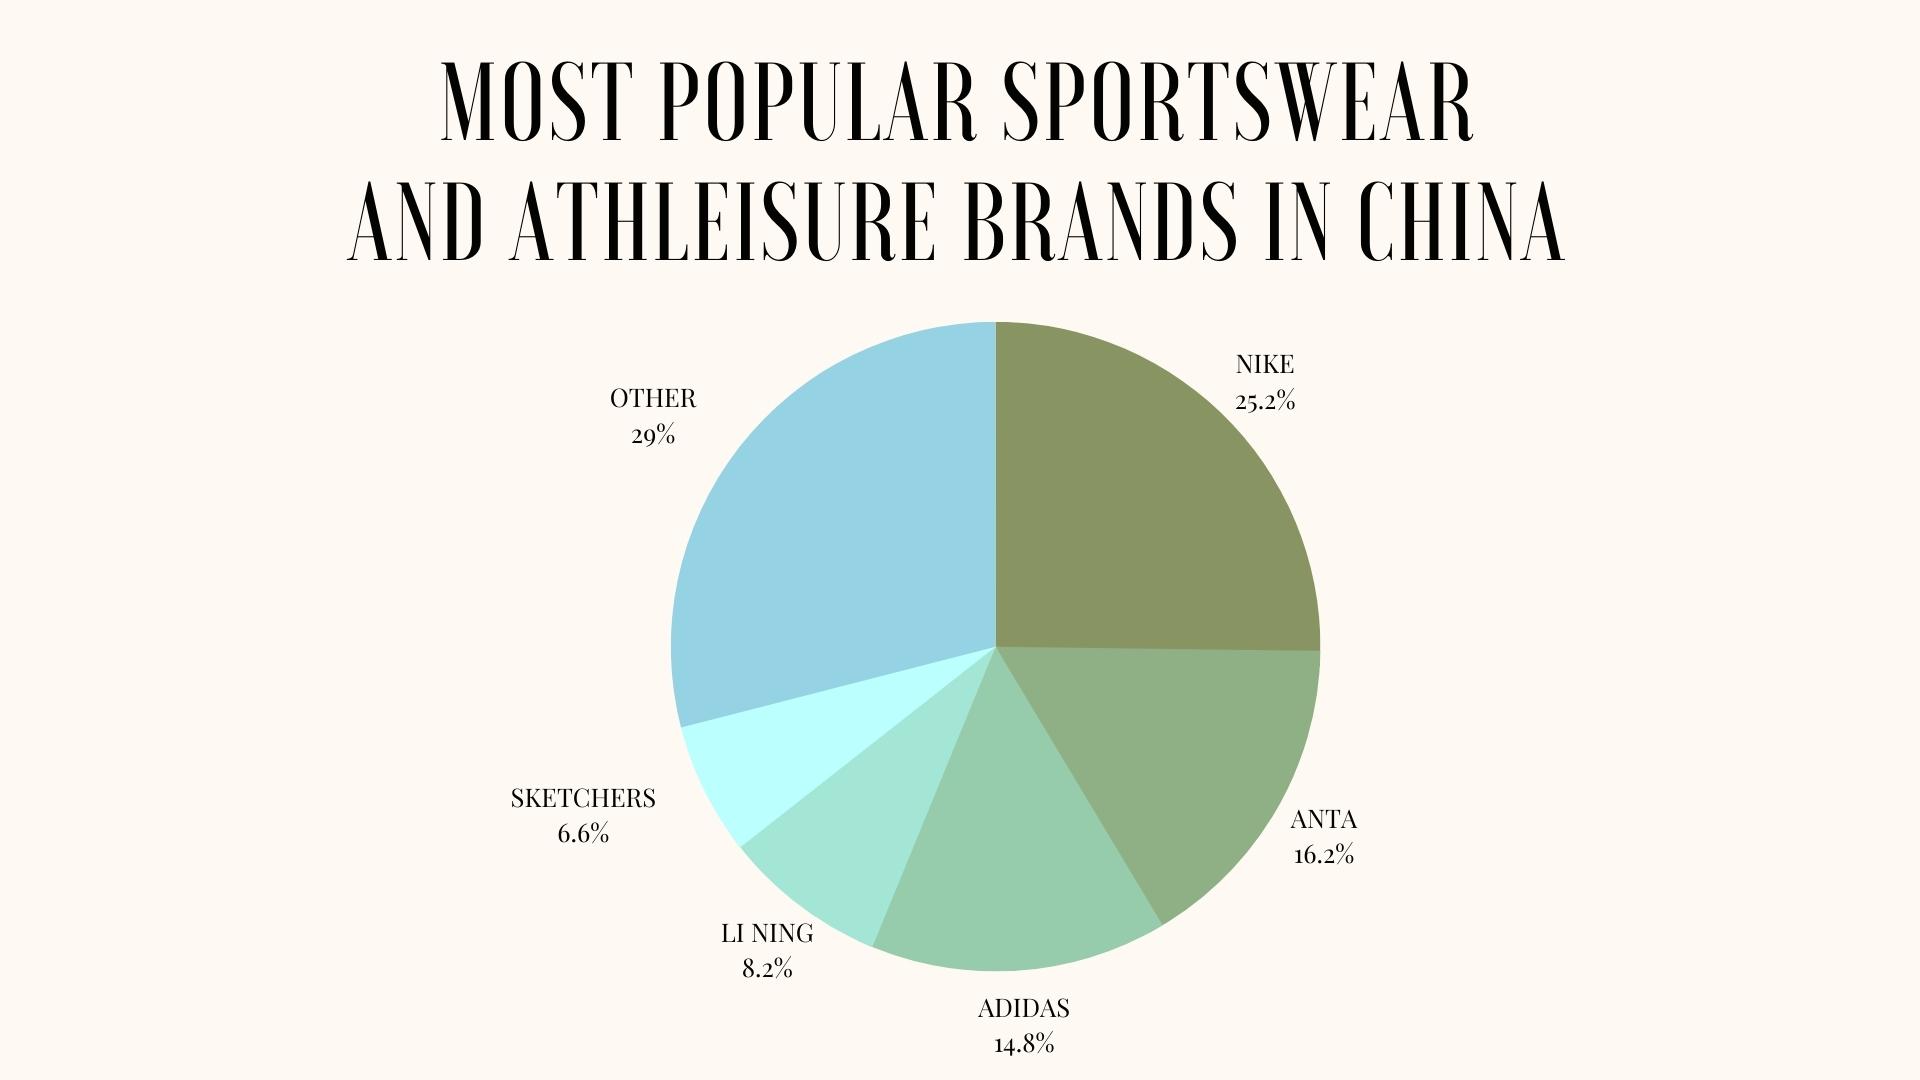 https://fashionchinaagency.com/wp-content/uploads/2022/09/MOST-POPULAR-SPORTSWEAR-AND-ATHLEISURE-BRANDS-IN-CHINA-2021.jpg